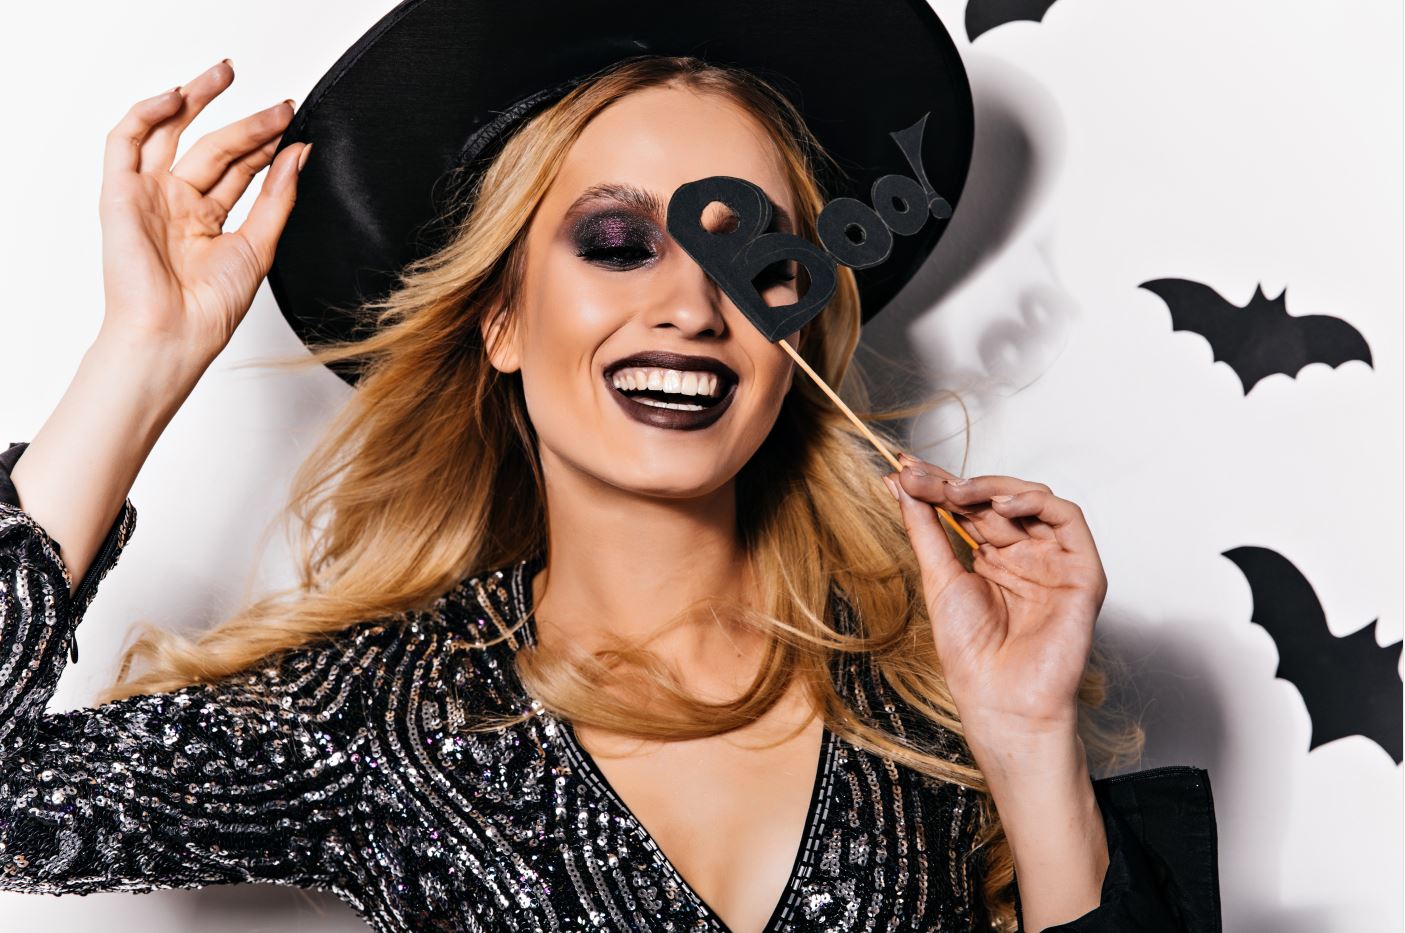 Now, Don't Let Halloween Haunt Your Face